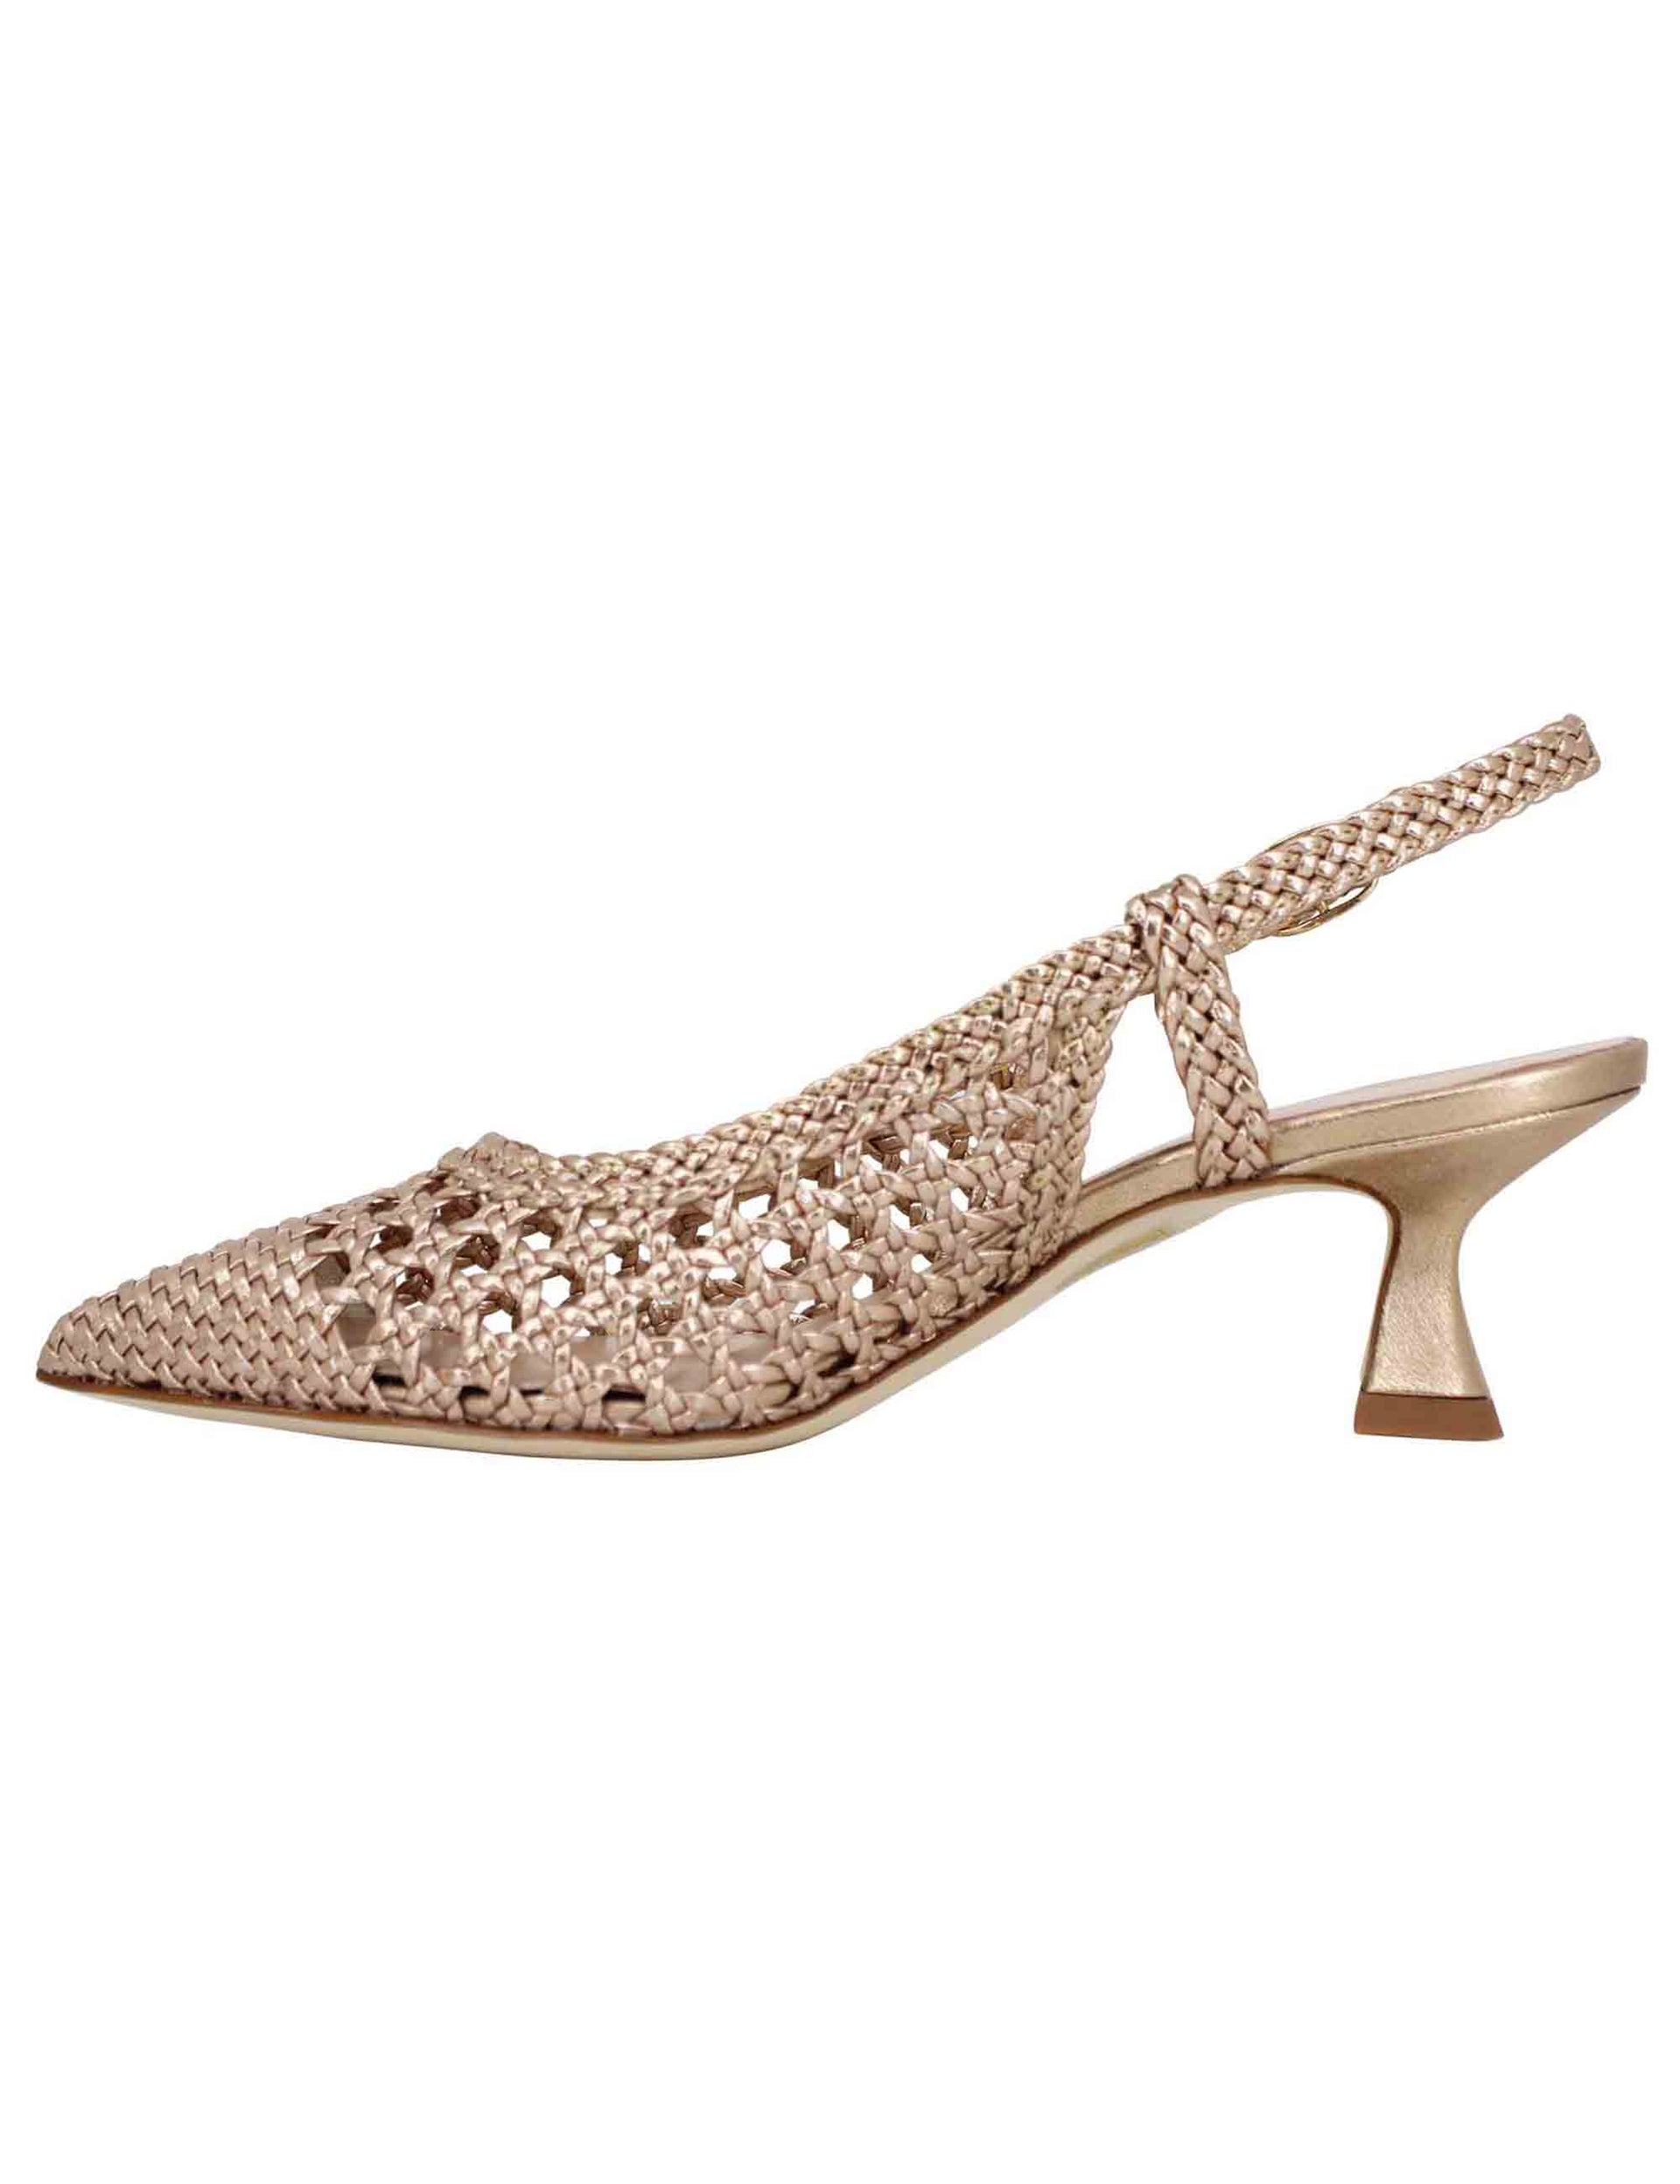 Women's slingback pumps in gold laminated woven leather with matching heel